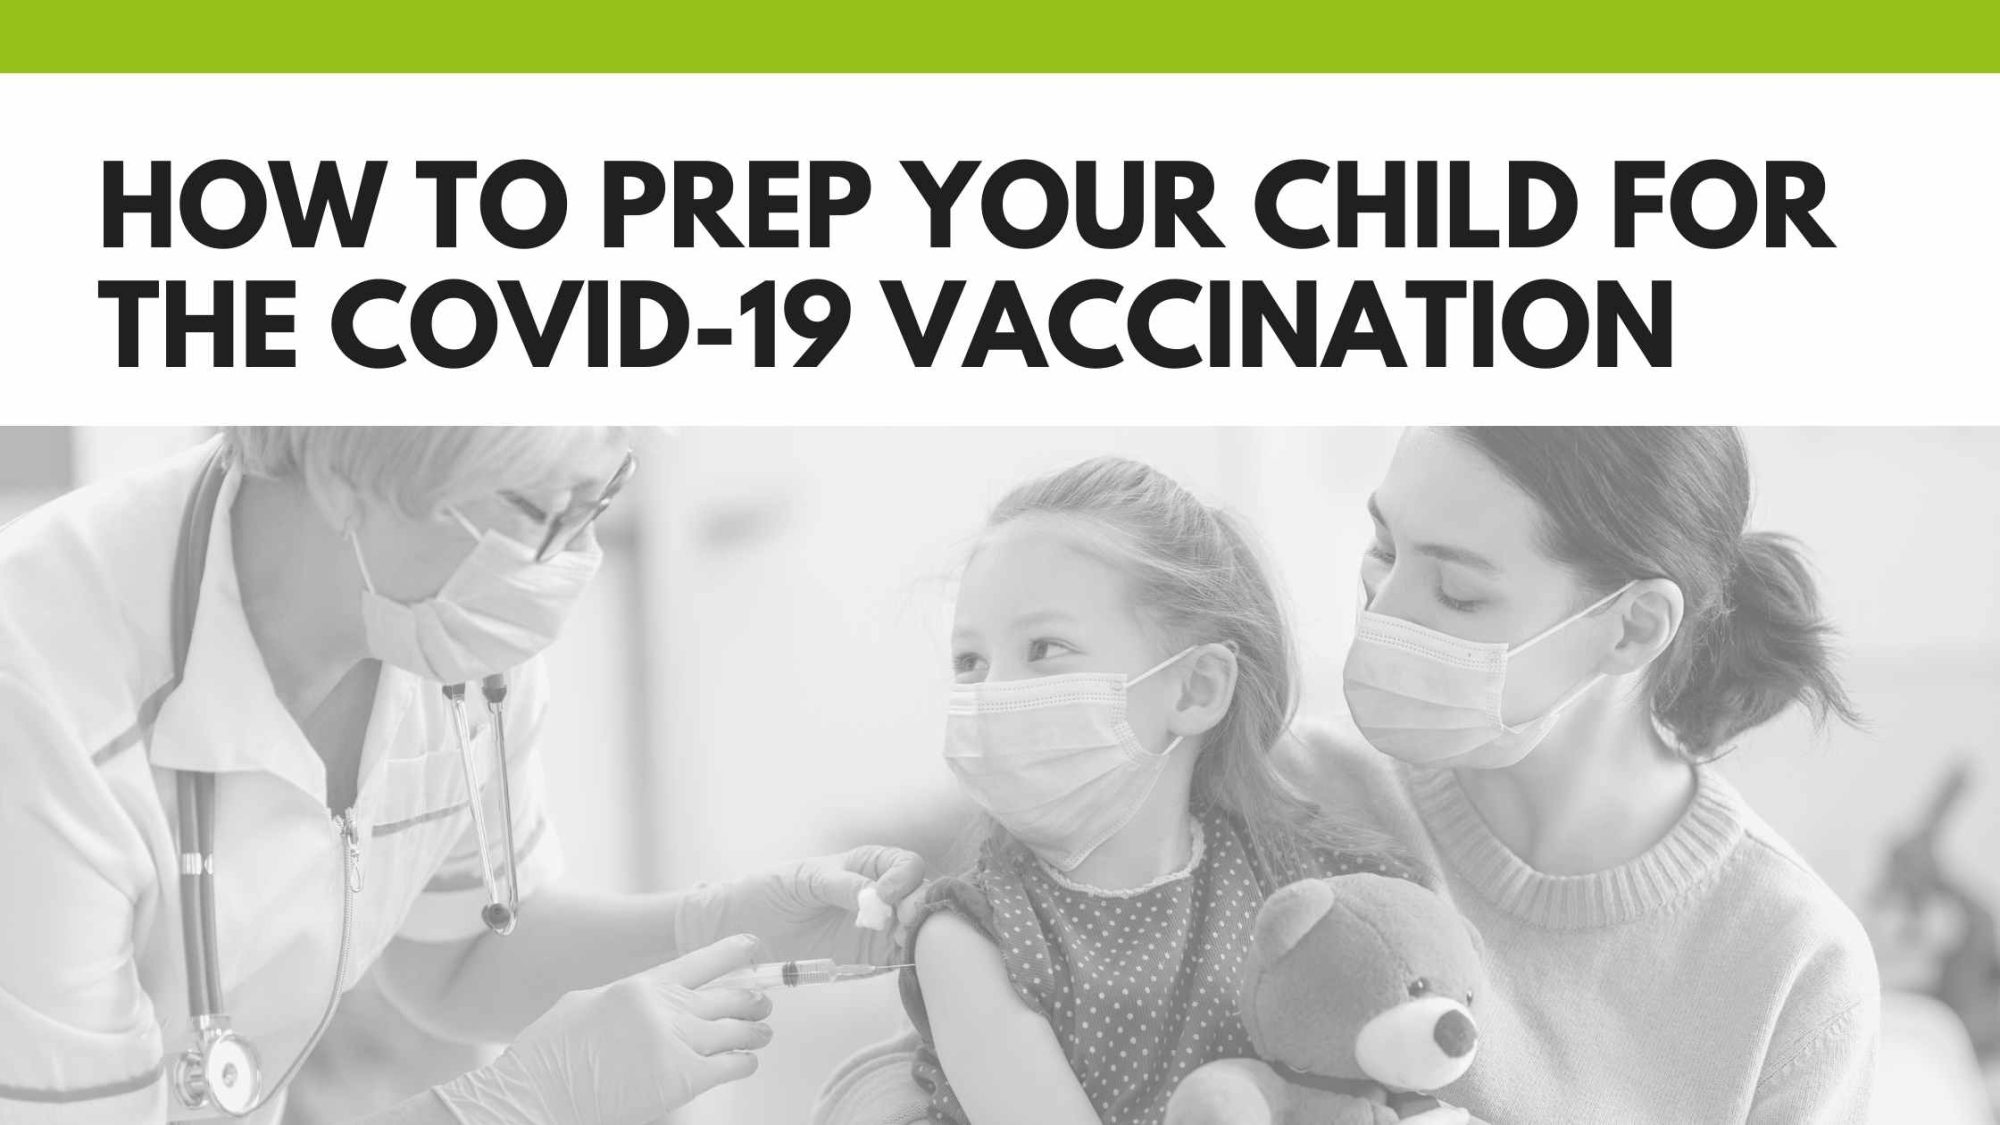 Title how to prep your child for the covid-19 vaccination appears above an image of a child receiving a vaccination while sitting in mothers lap holding bear.